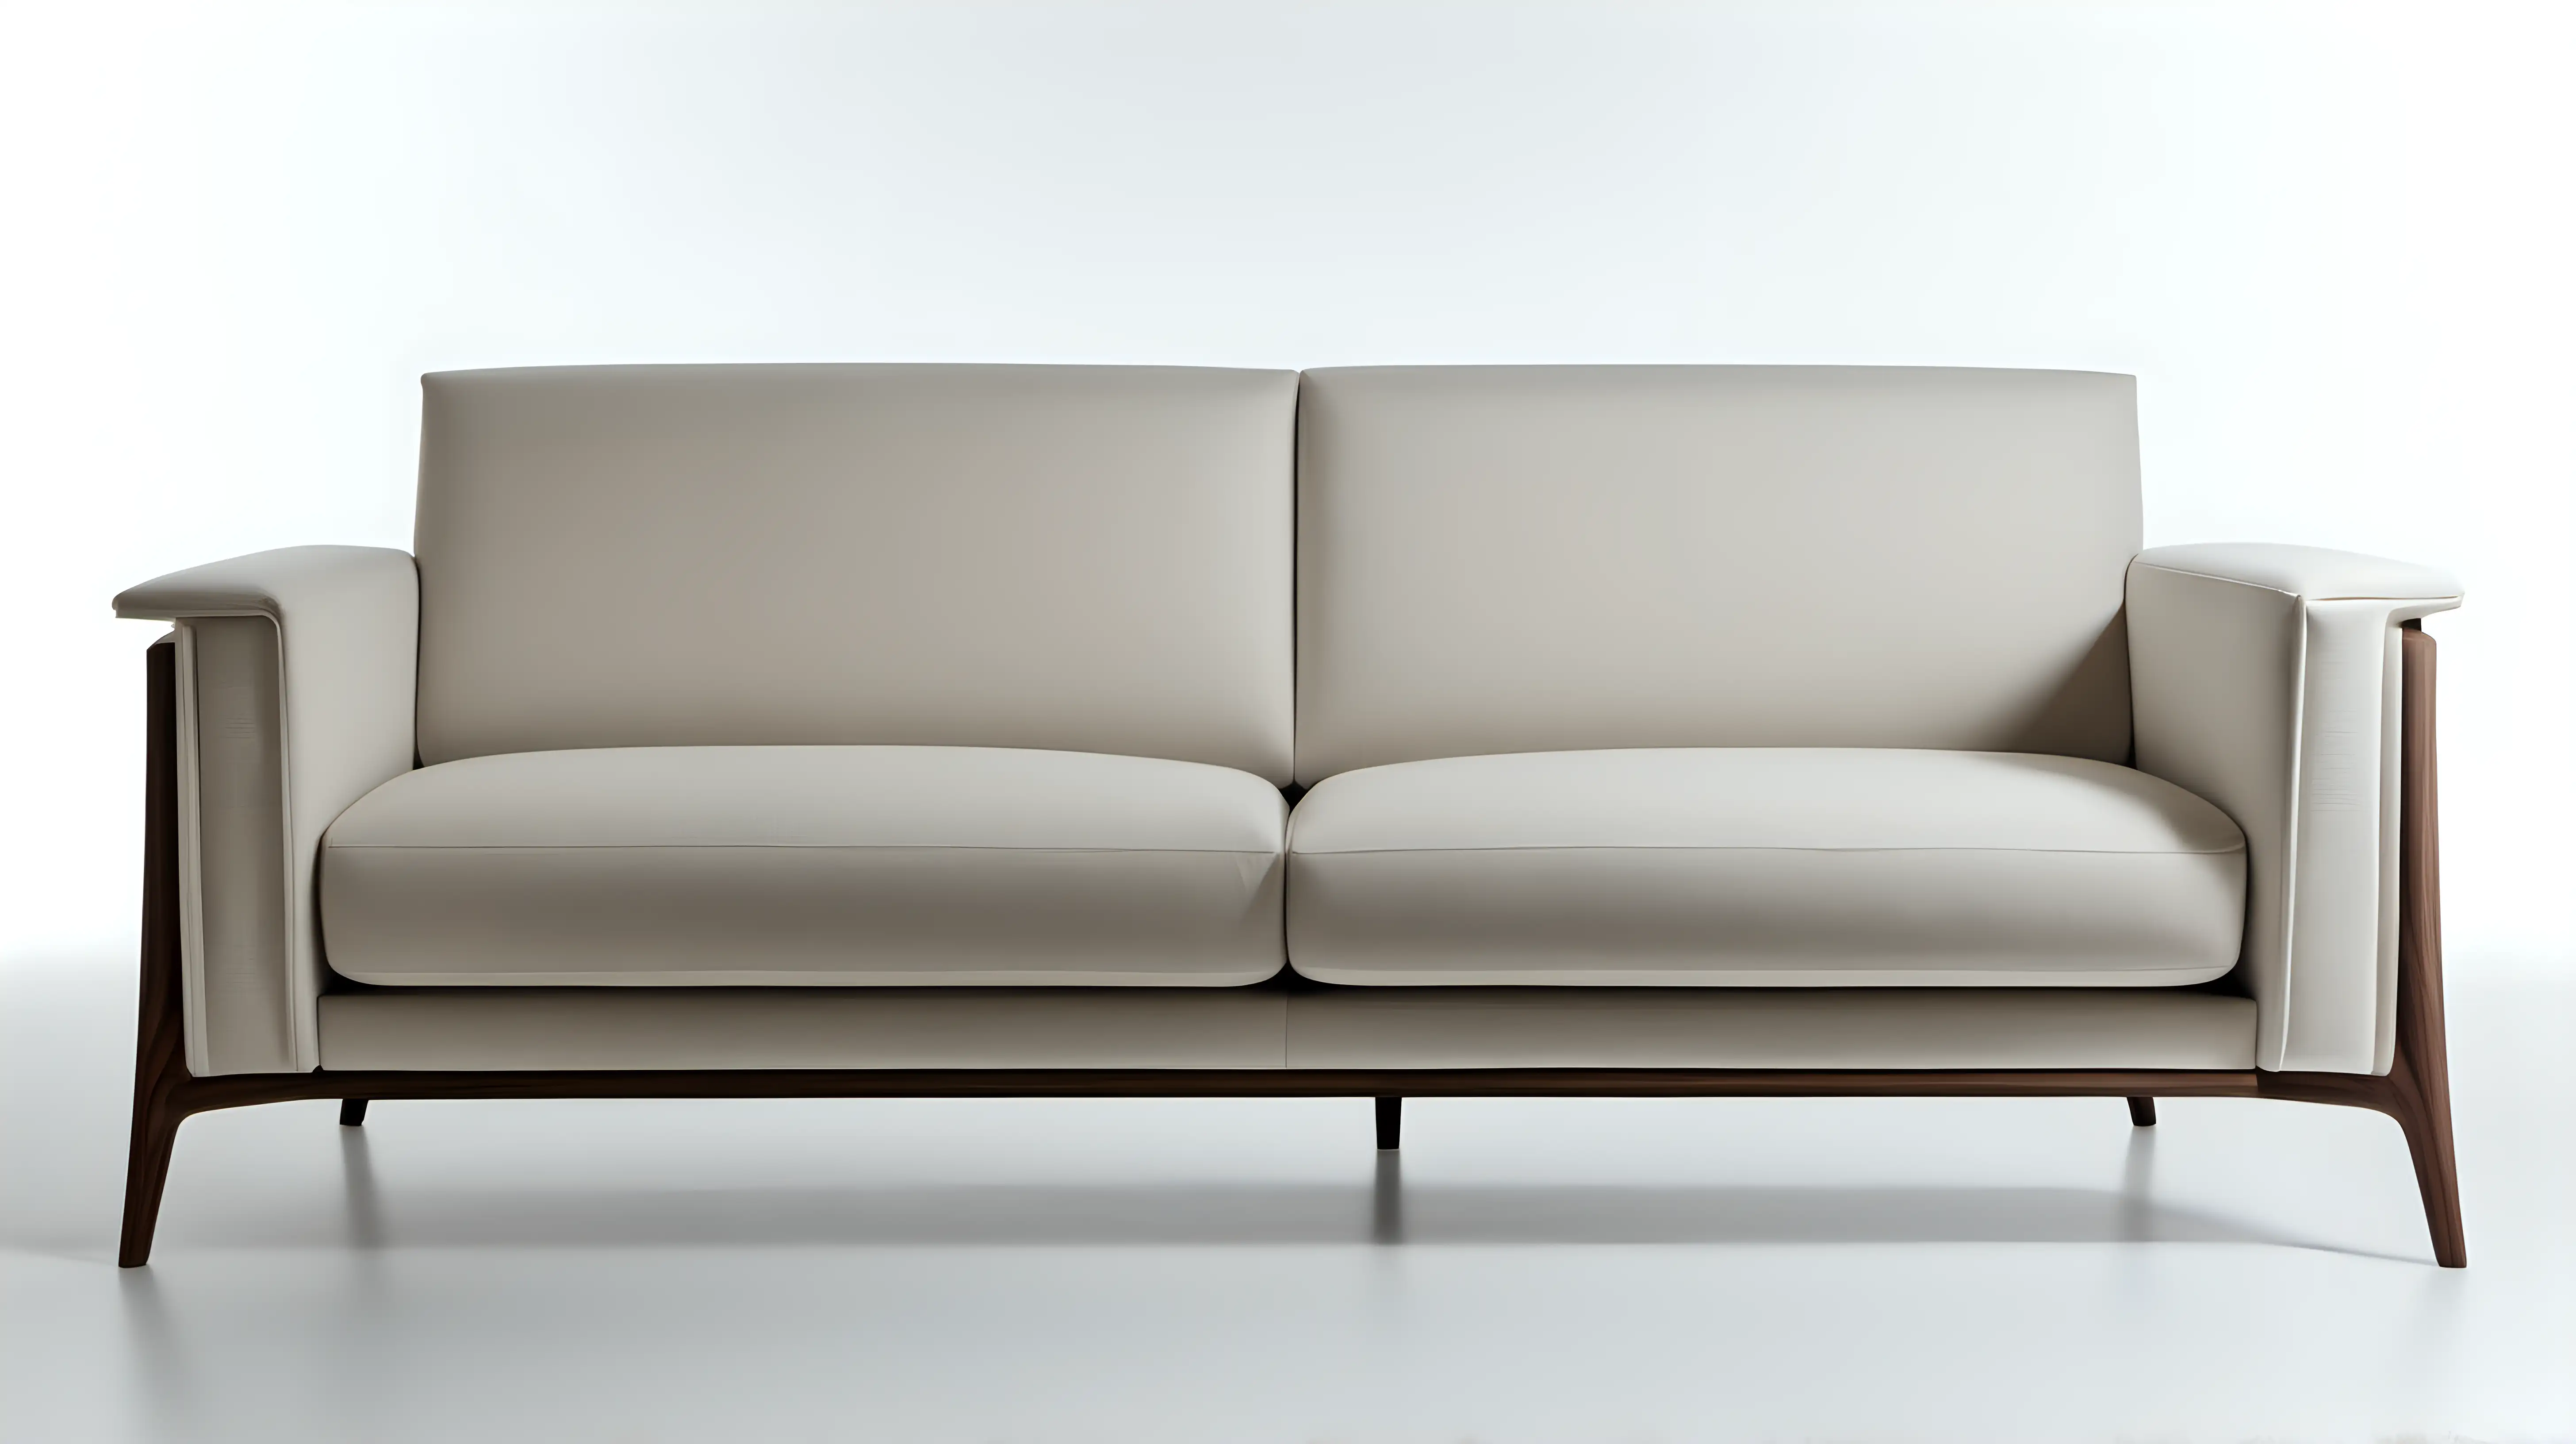 ItalianInspired Sofa with Mechanical and NatureInspired Details